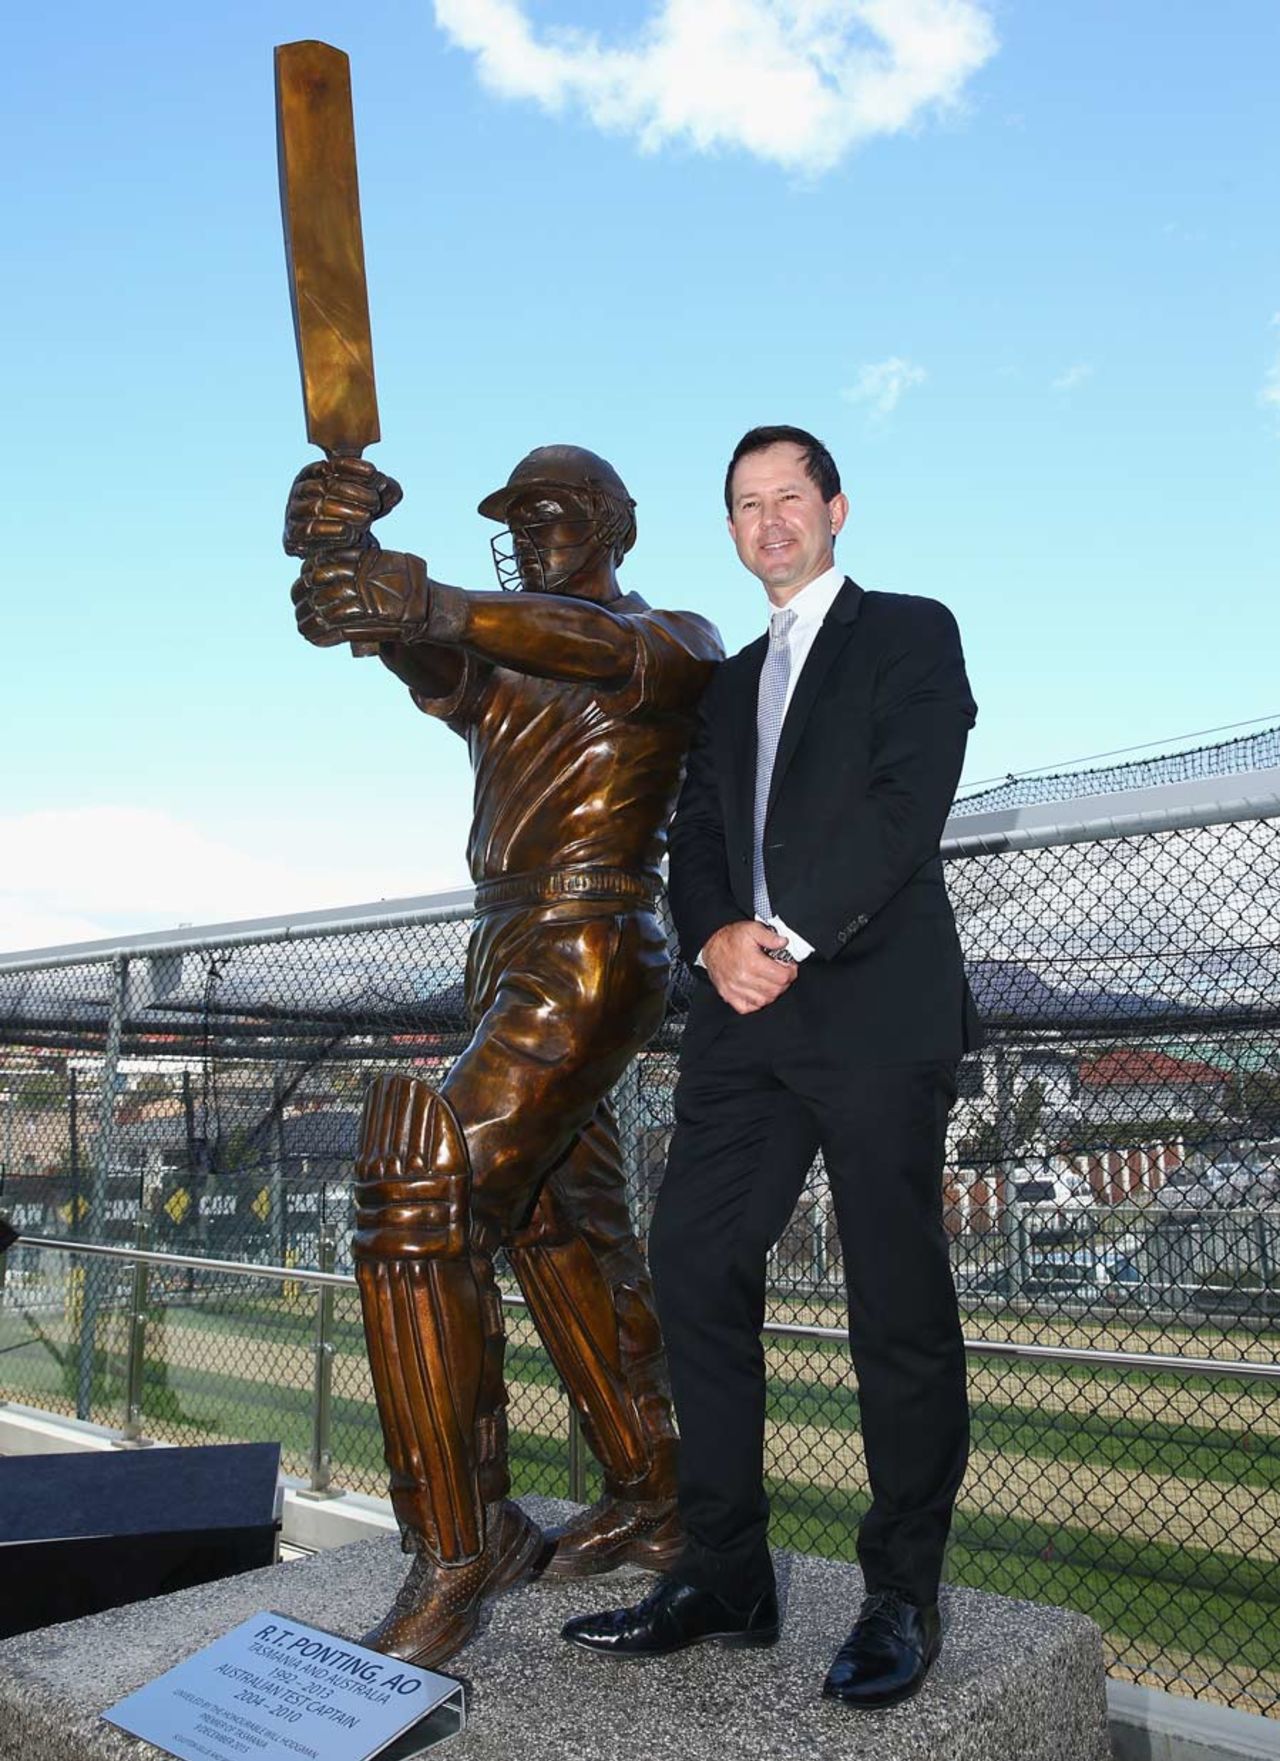 Ricky Ponting poses beside a statue of himself at the Bellerive Oval, Hobart, December 9, 2015